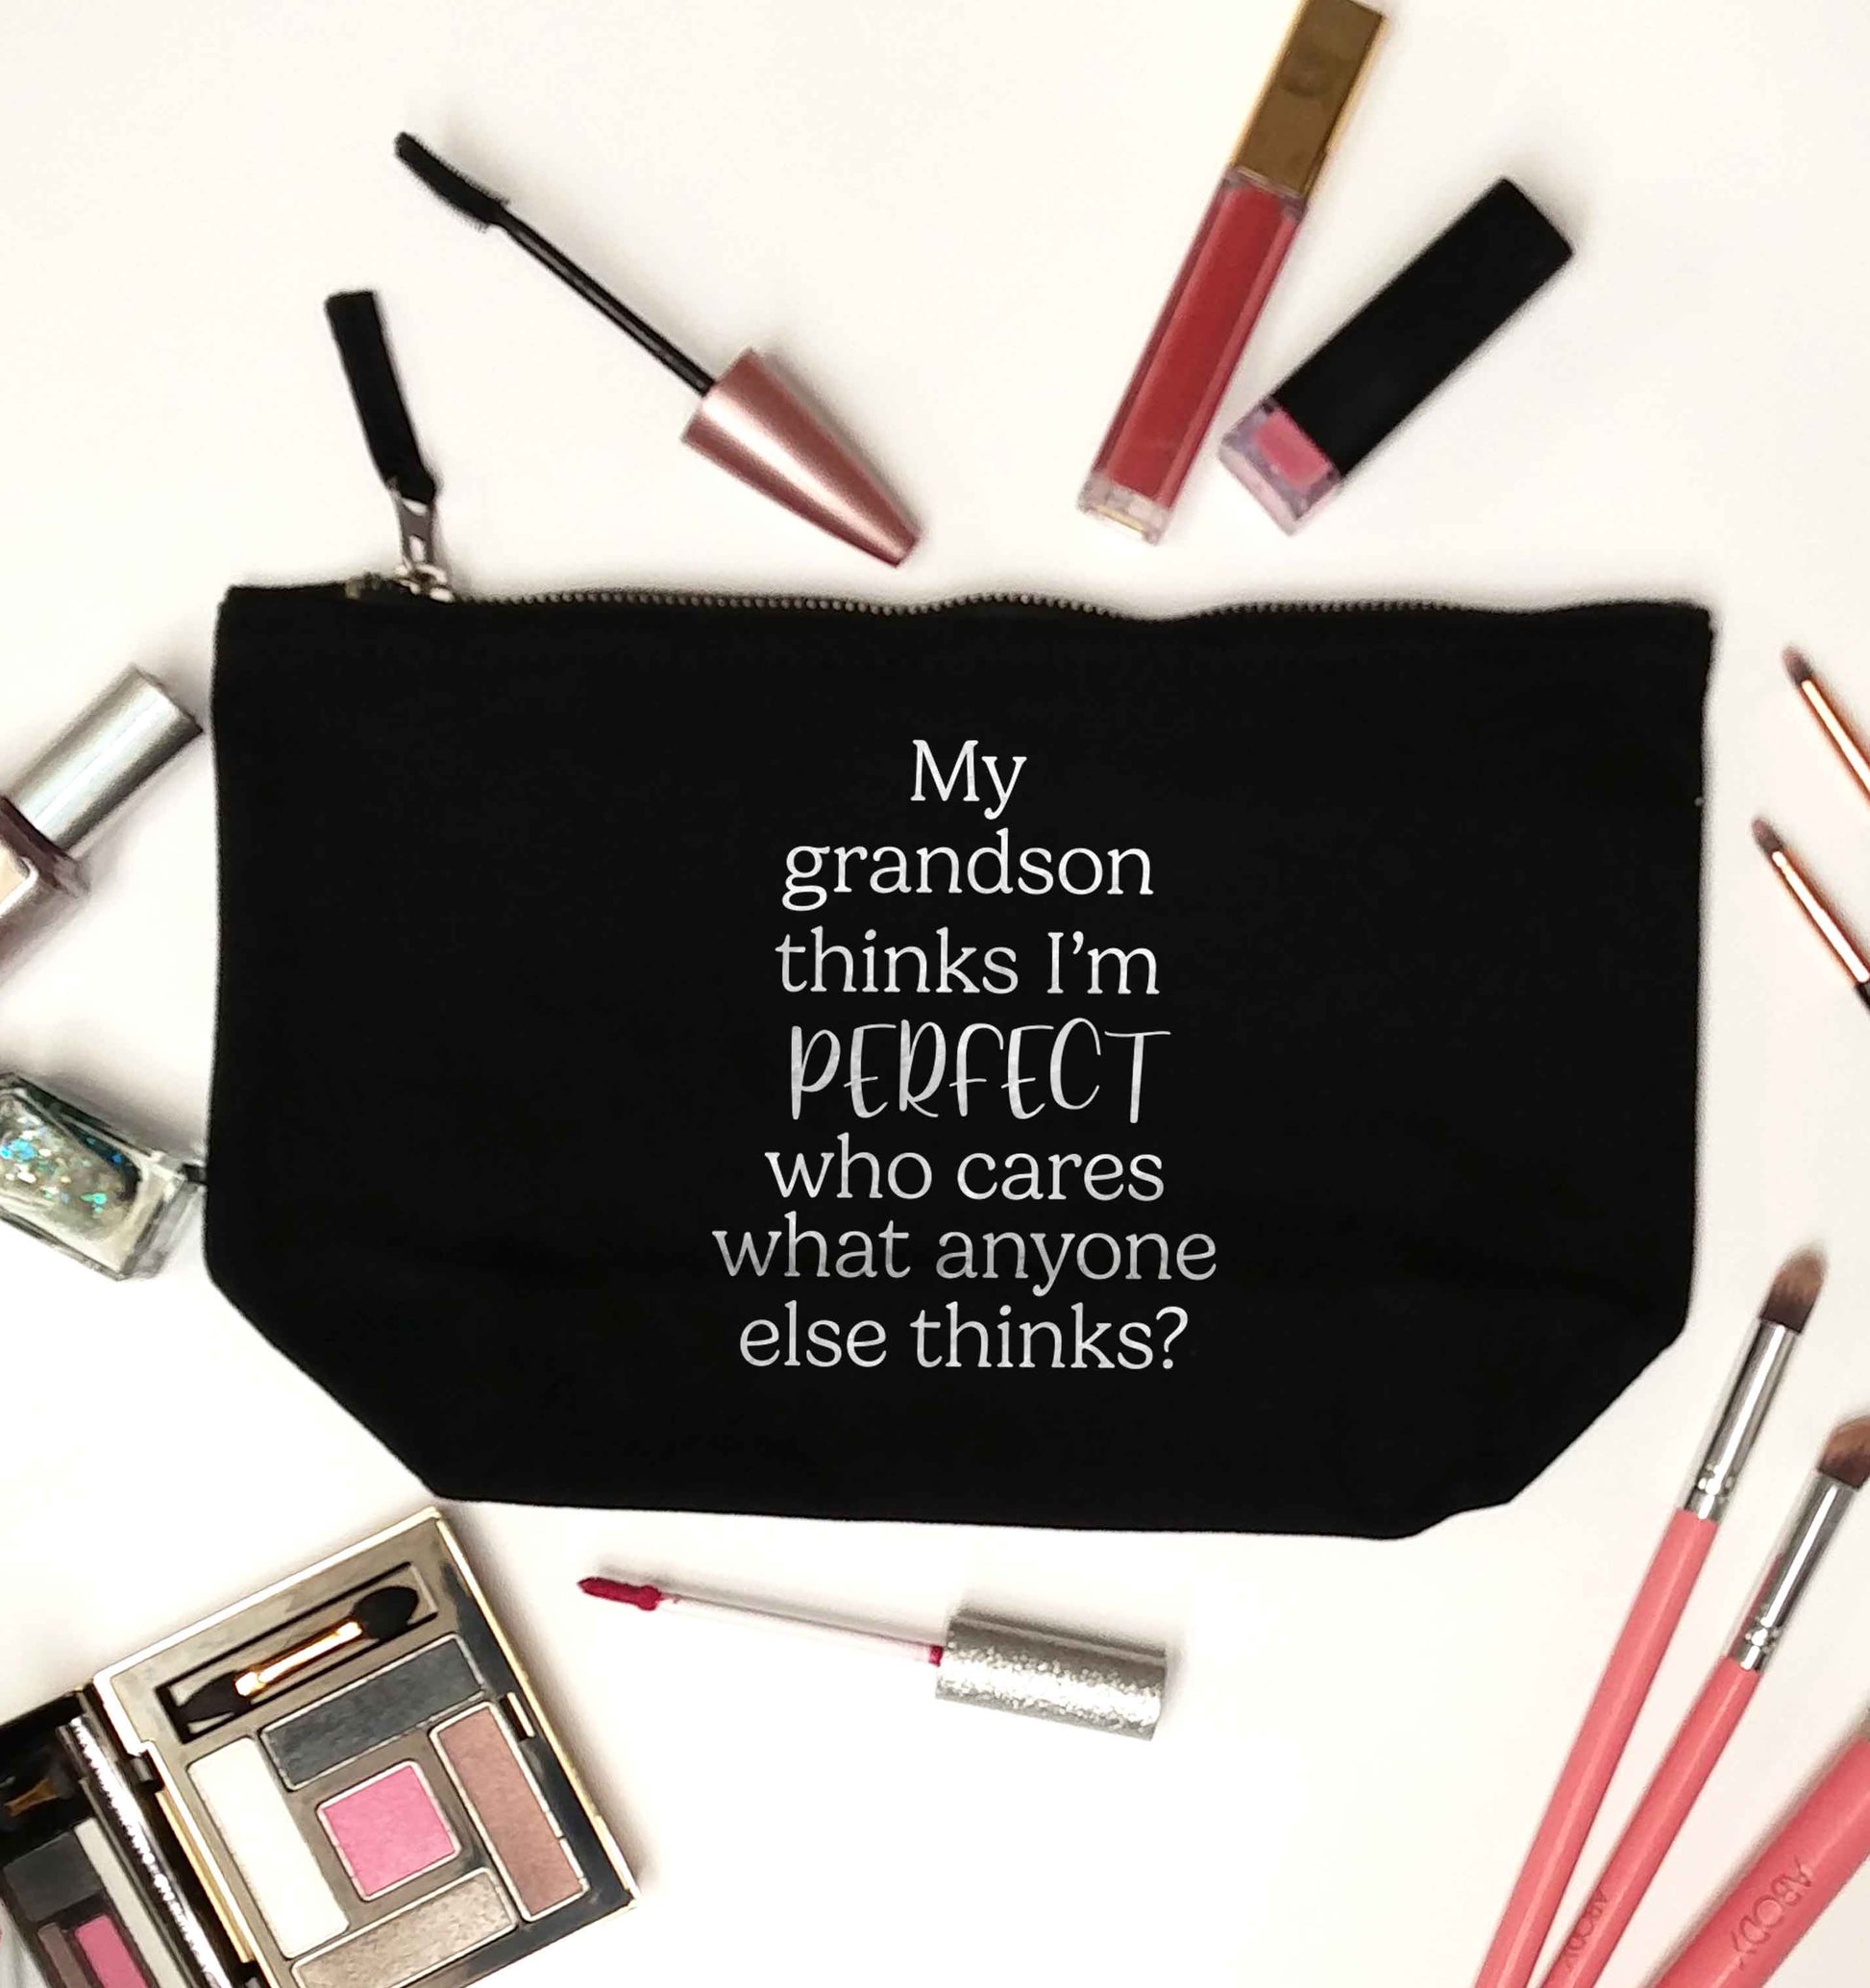 My Grandson thinks I'm perfect who cares what anyone else thinks? black makeup bag